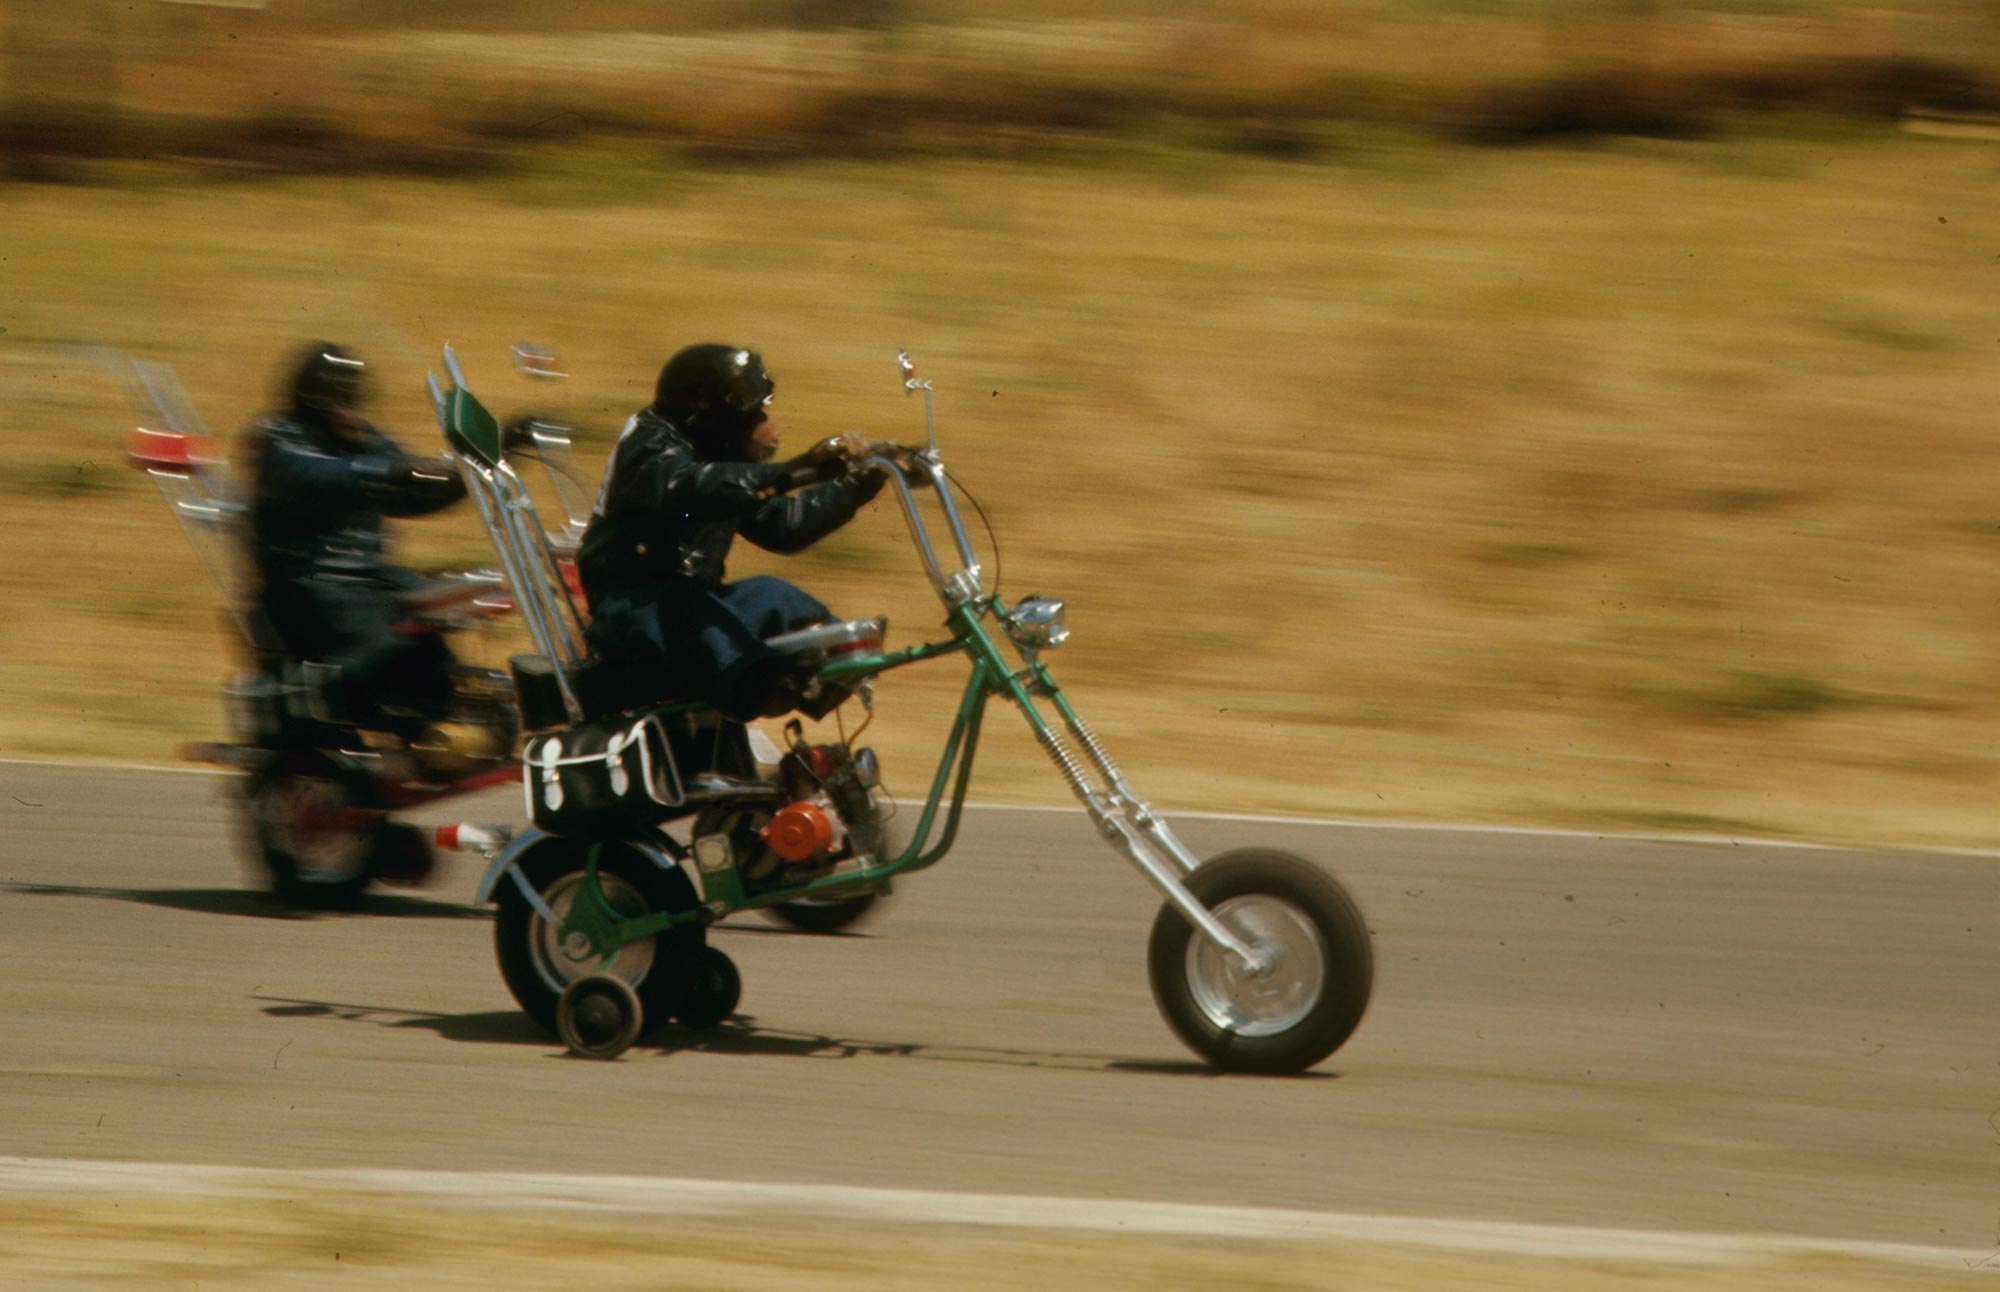 A ’70s TV show called Lancelot Link featured chimpanzees riding highly modified minibikes